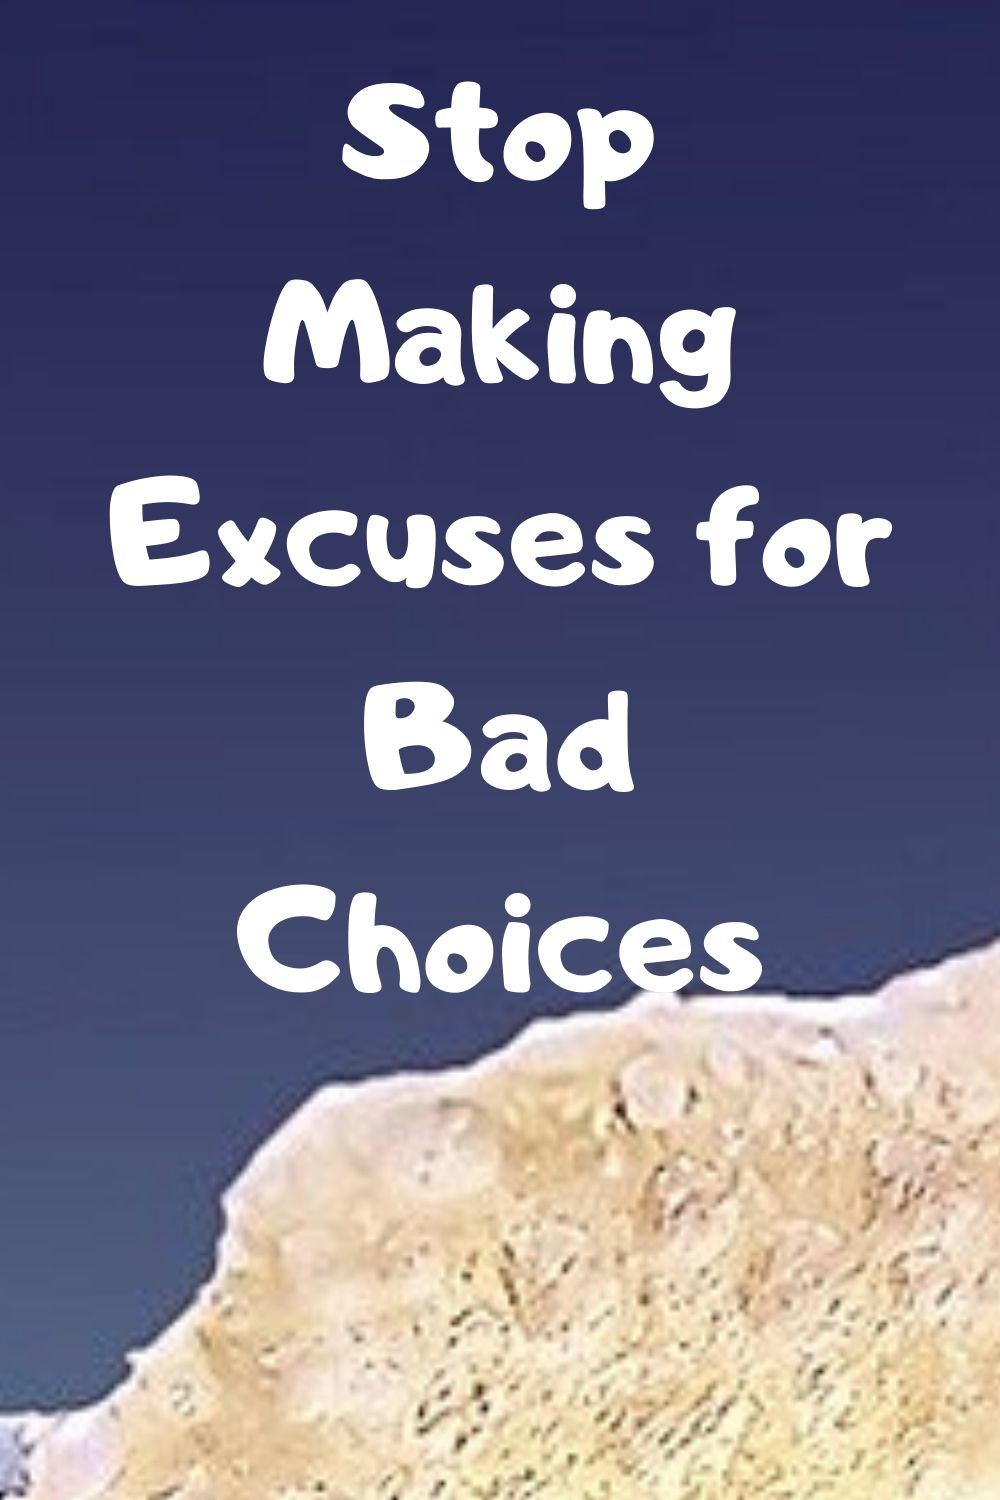 Bad choices: Stop Making Excuses for Bad Choices